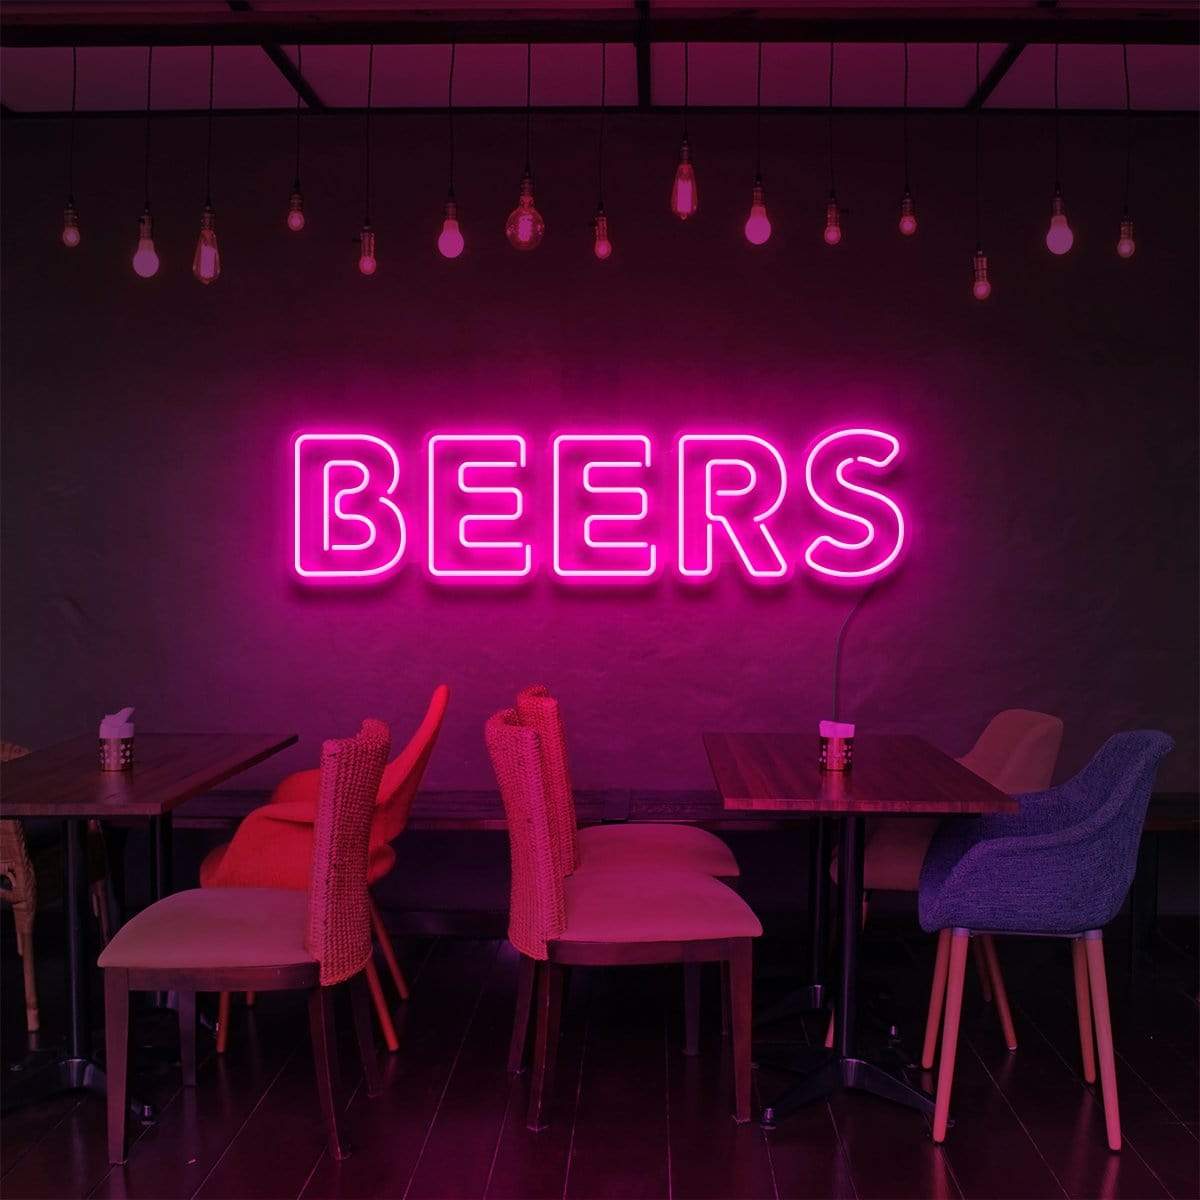 "Beers" Neon Sign for Bars & Restaurants 60cm (2ft) / Pink / LED Neon by Neon Icons